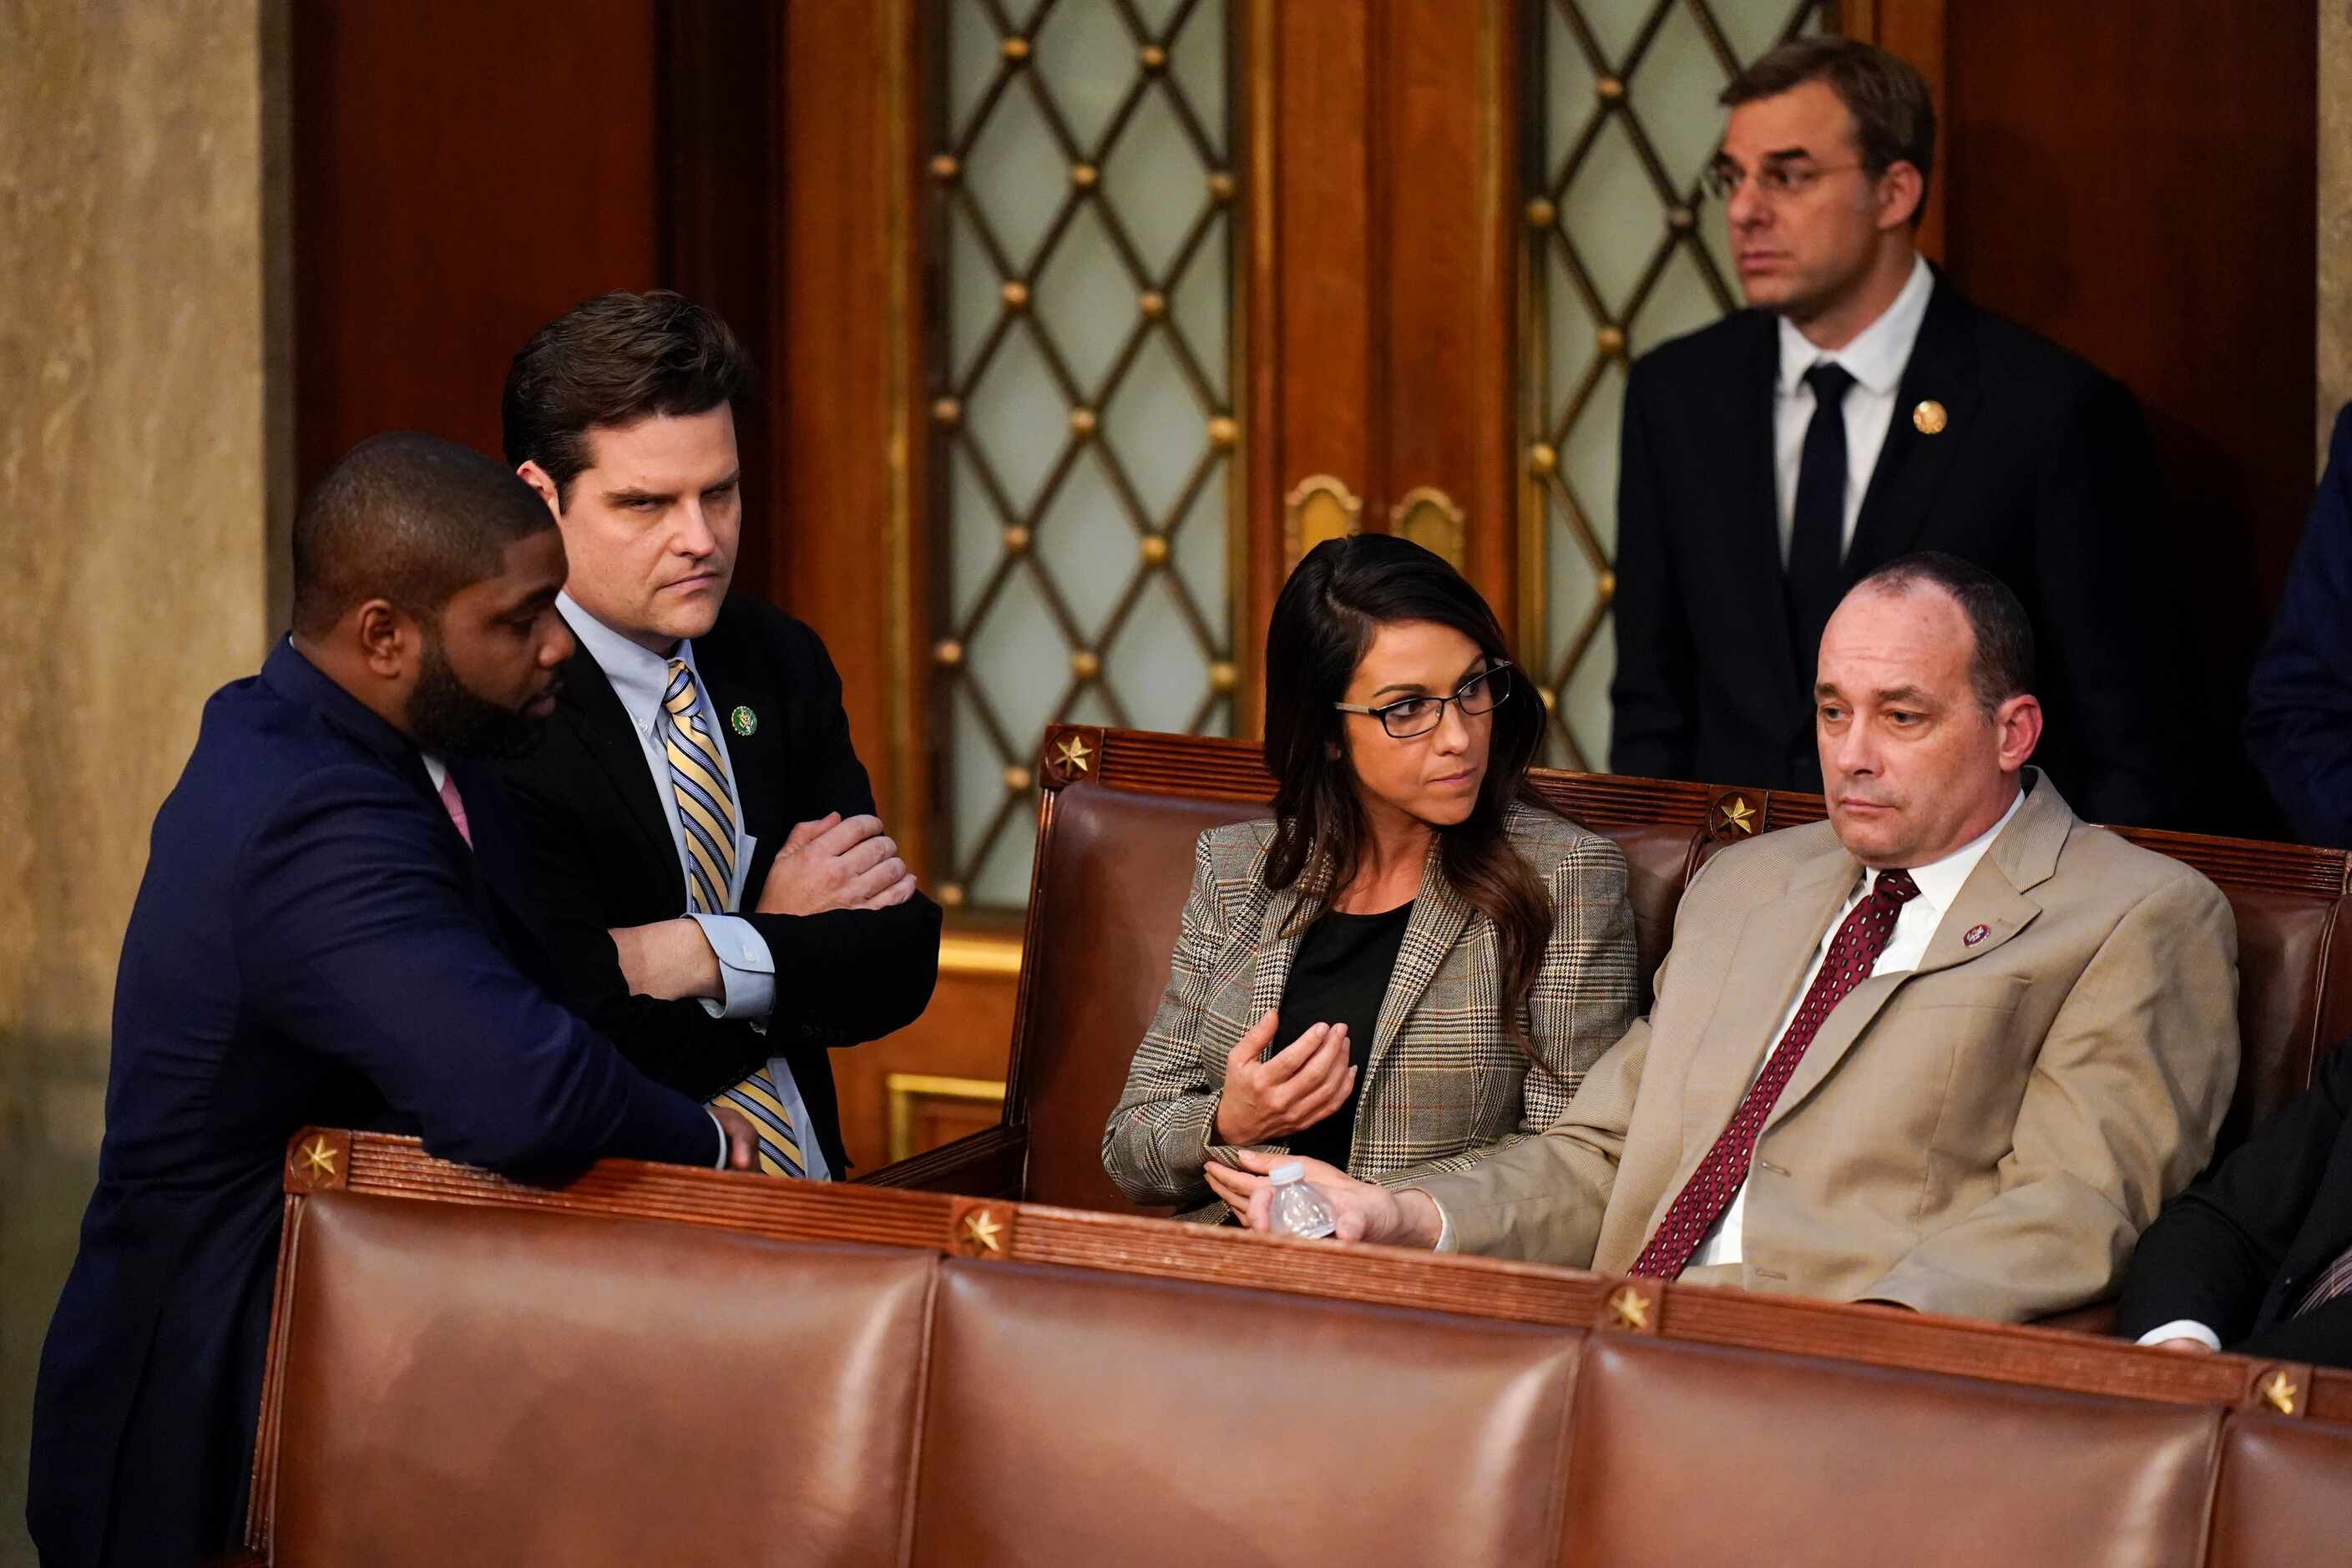 Lawmakers talk during the tenth round of voting in the House chamber as the House meets for...